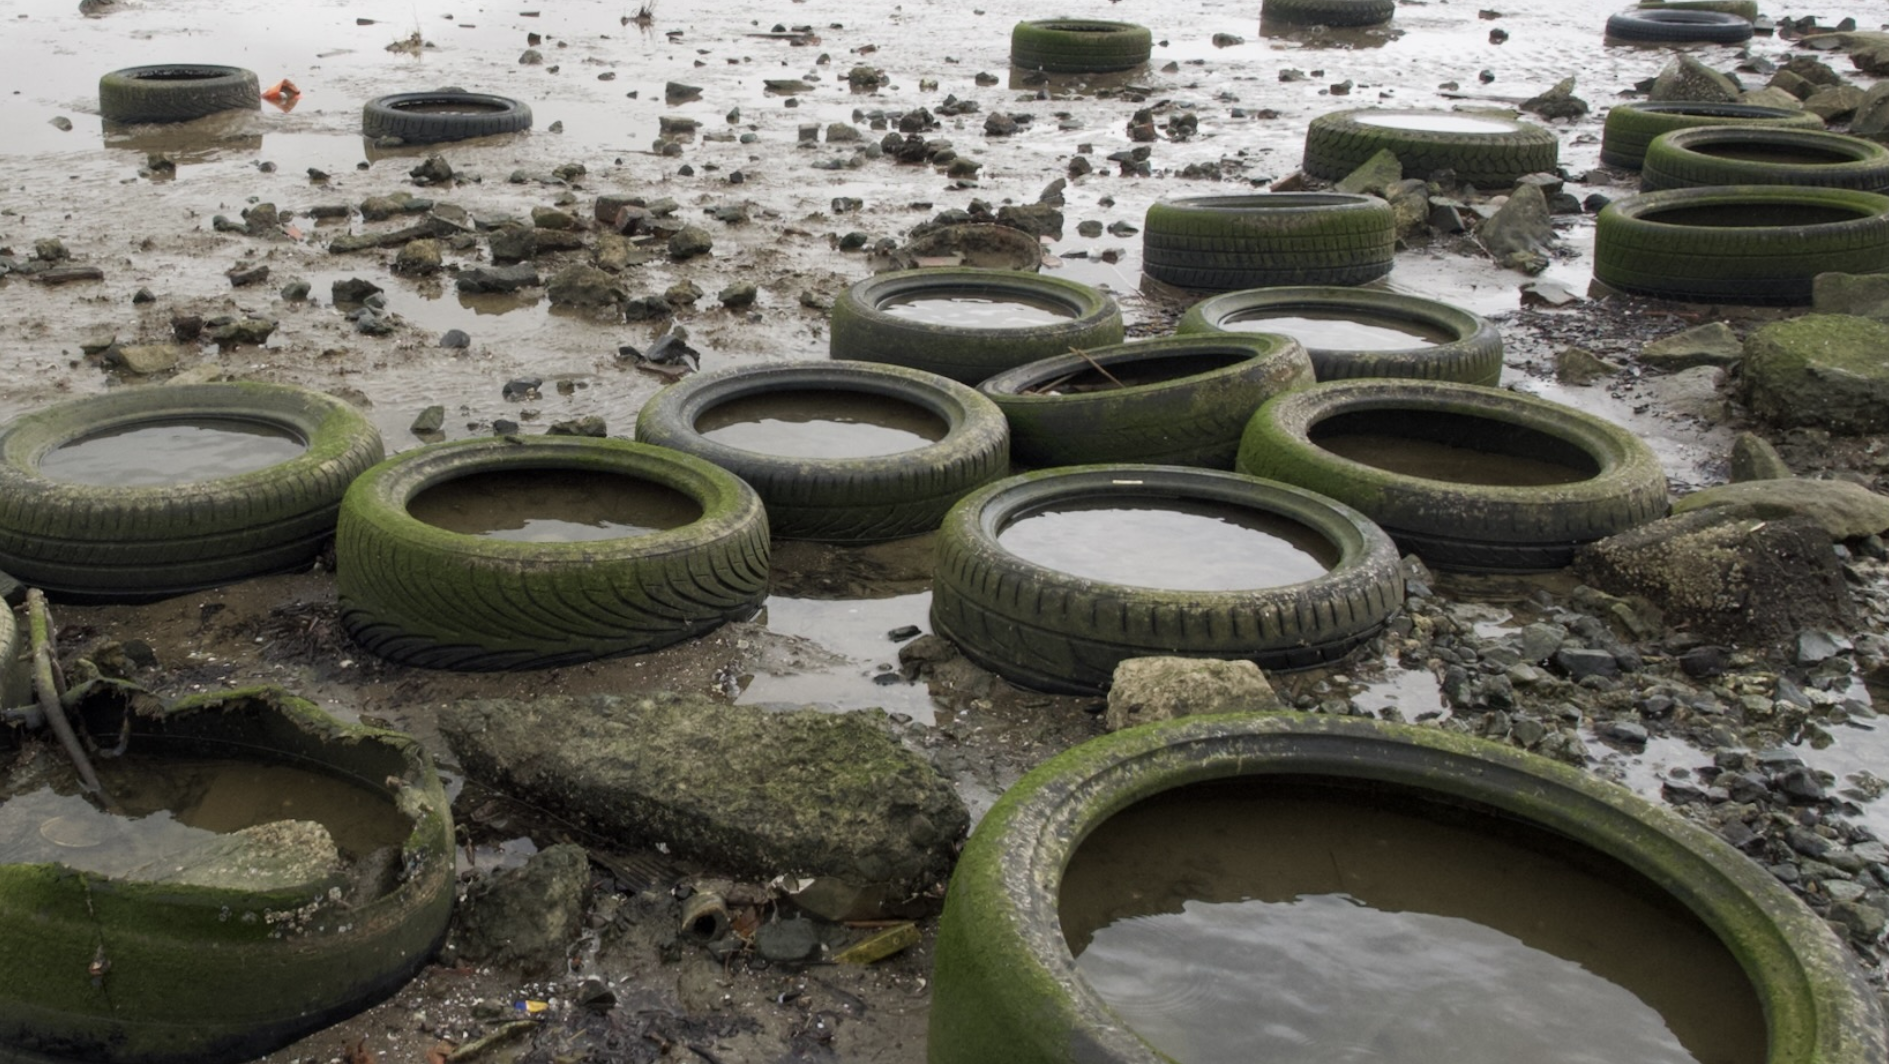 Dozens of tires deteriorate in the mud of Rodeo Creek at low tide